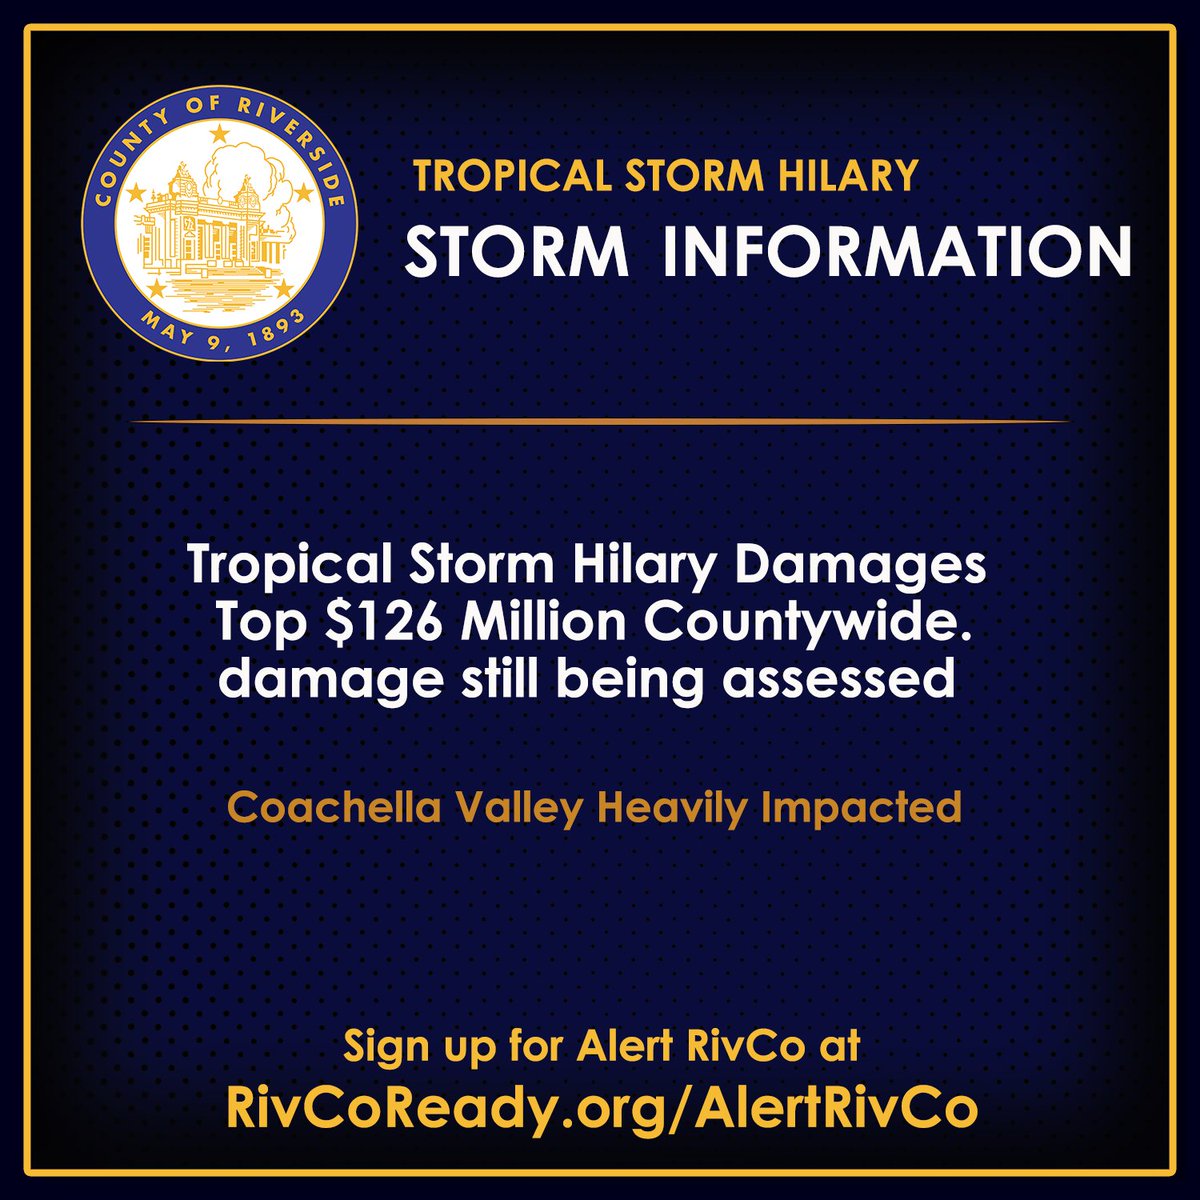 The damage left by #TropicalStormHilary is currently estimated at more than $126 million throughout all of #RivCo. Rainfall rates approached a 50-year storm for the Coachella Valley floor areas and in excess of a 1,000-year event in some mountain canyon areas.

News Release: